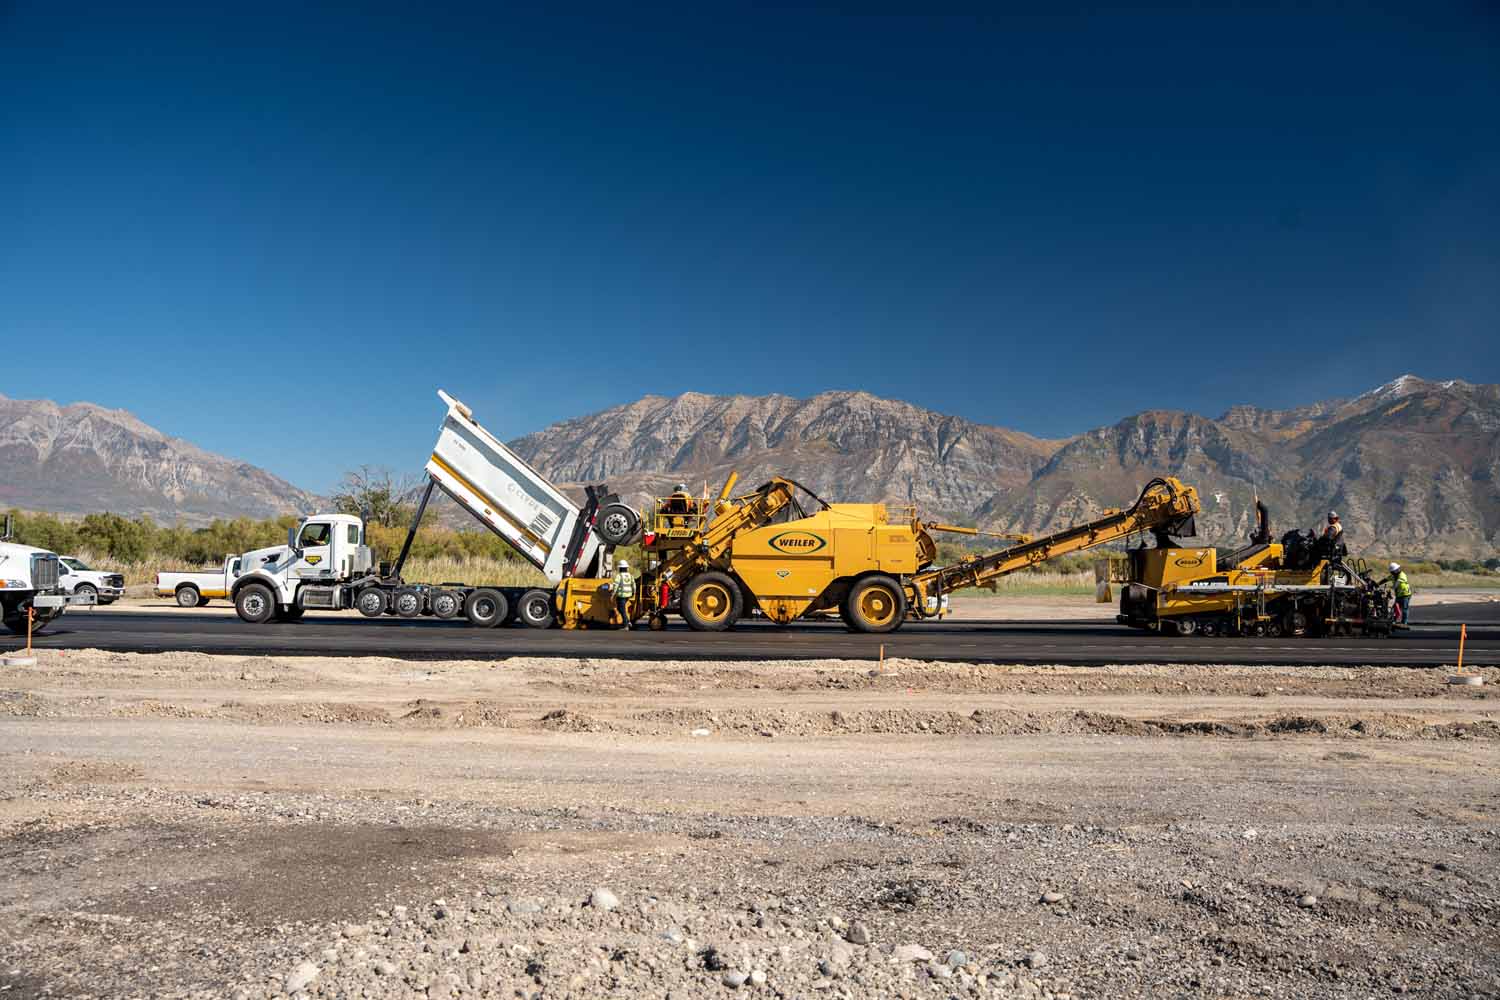 Provo Airport Taxiway paving asphalt